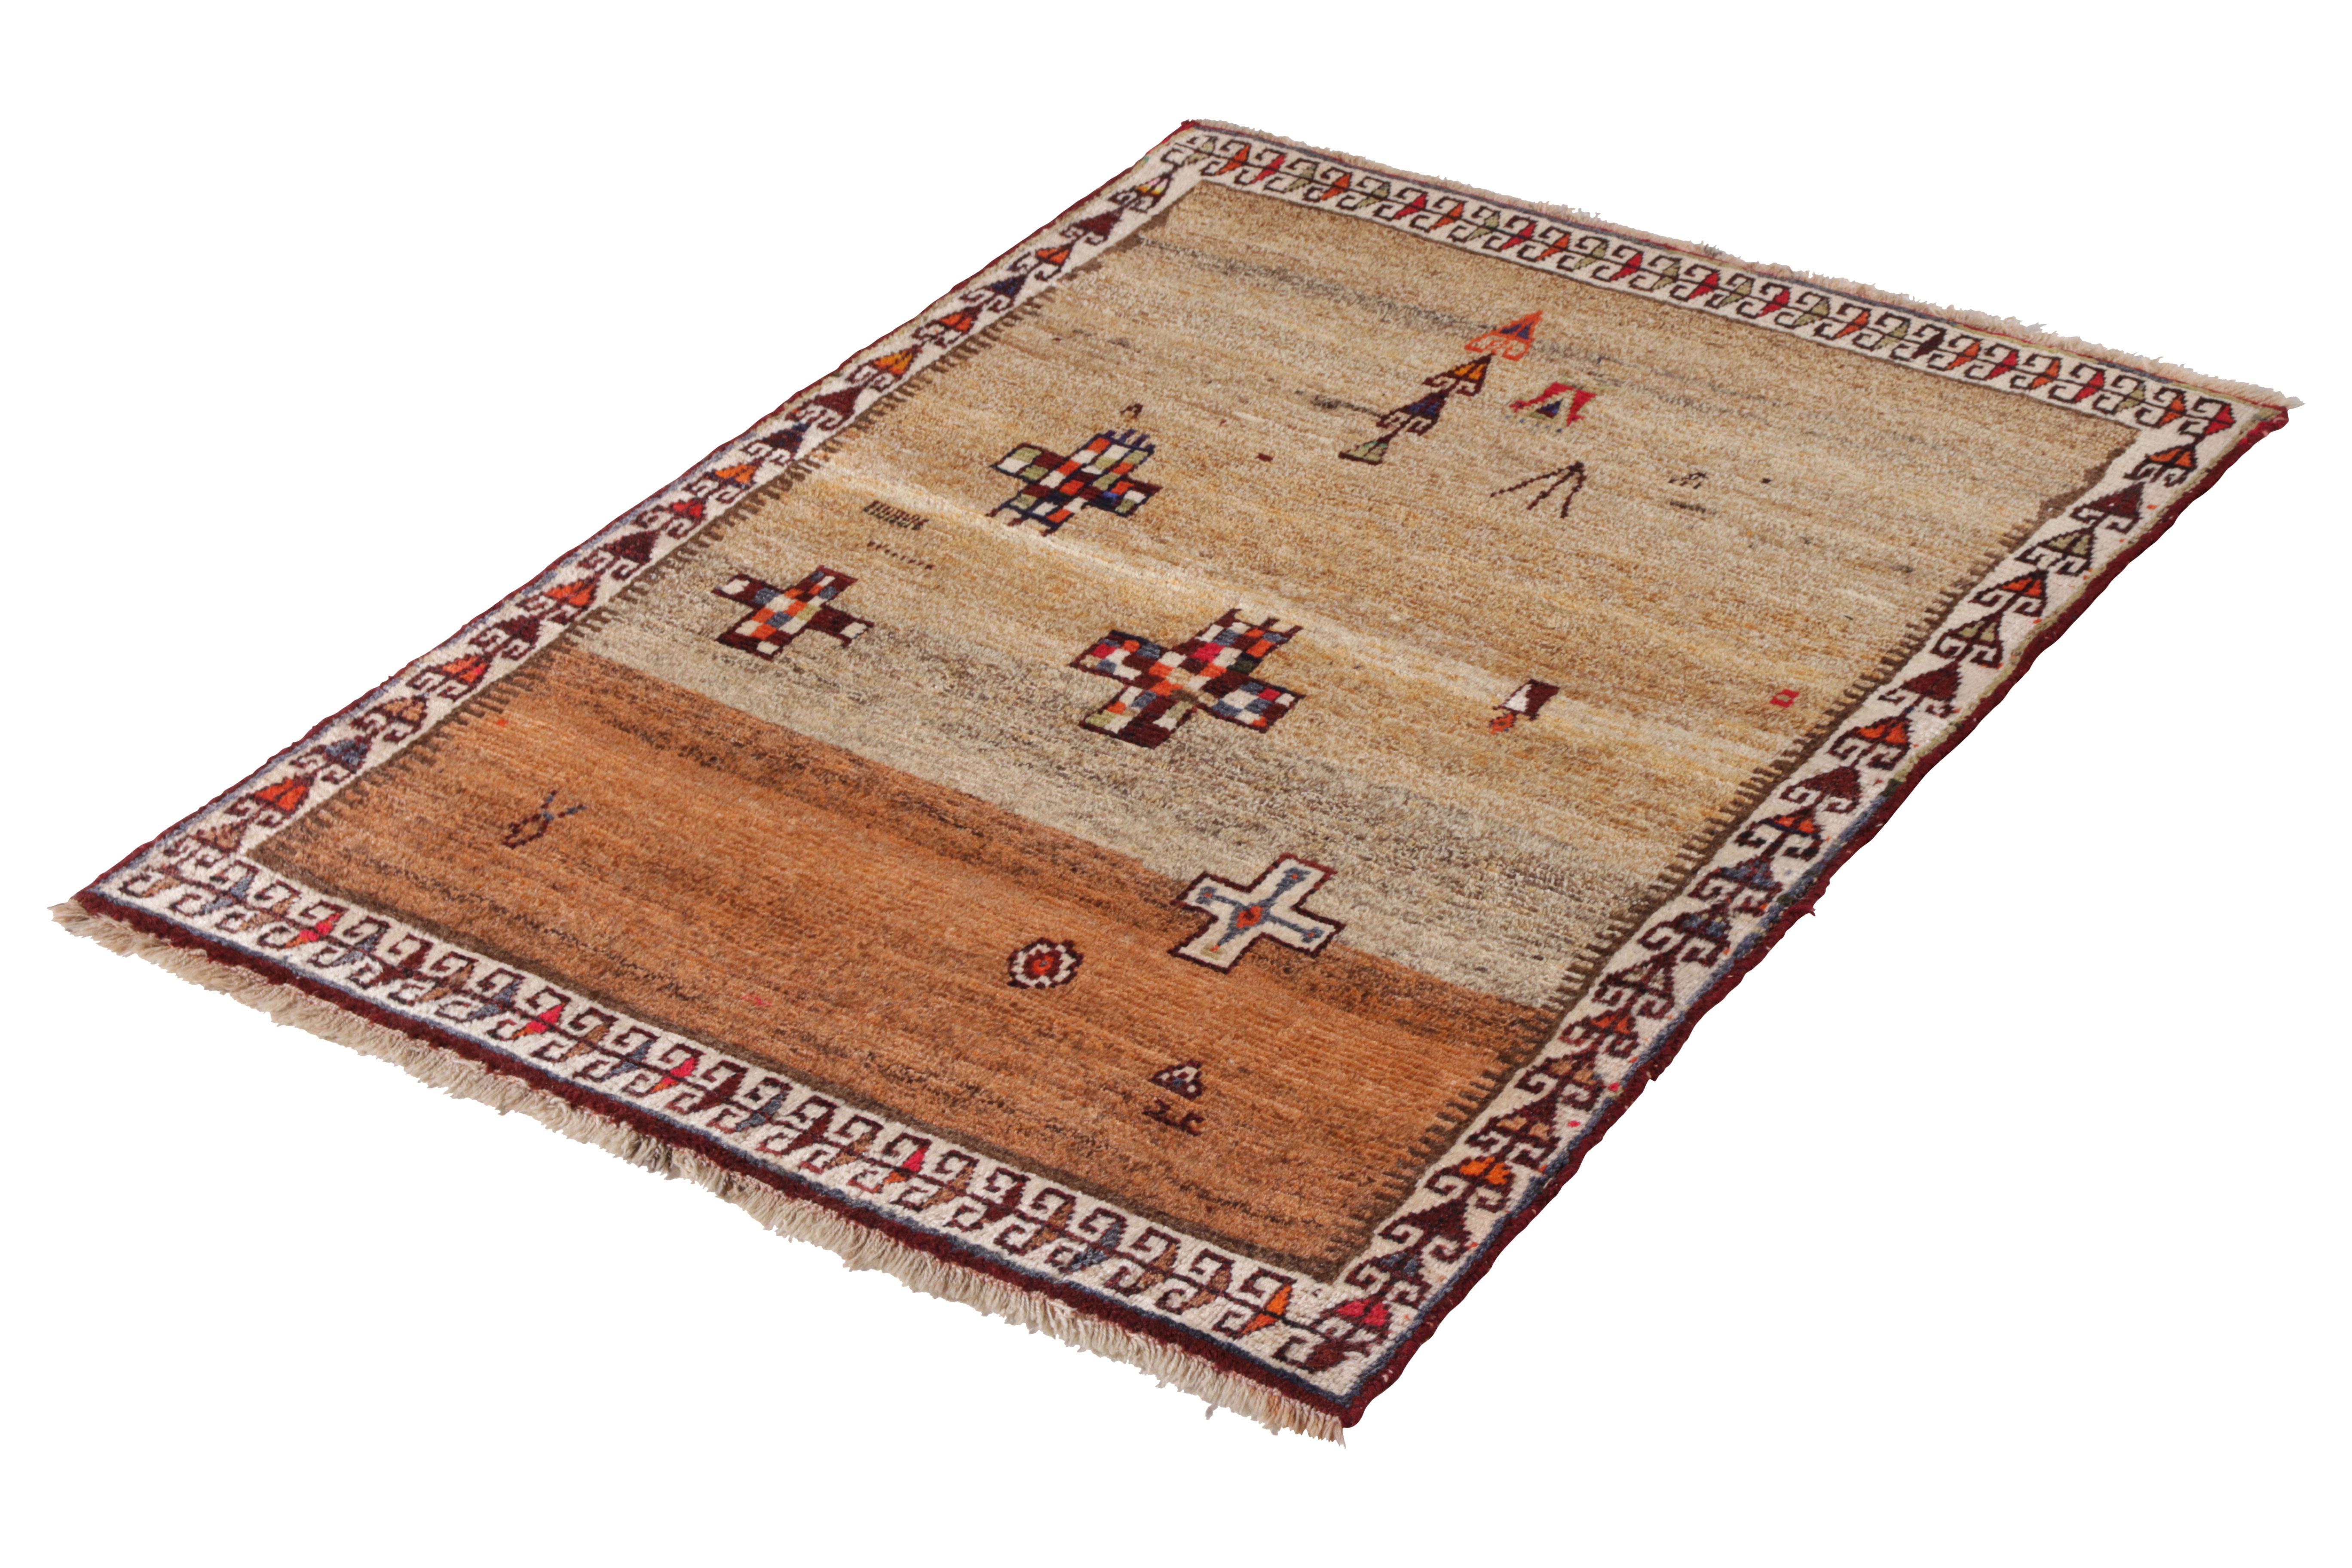 Hand knotted in wool originating circa 1950-1960, this vintage Persian rug connotes a mid-century Persian rug design with a unique juxtaposition of traditional and uncommonly Minimalist tribal elements, a primitivism array of cross motifs against a